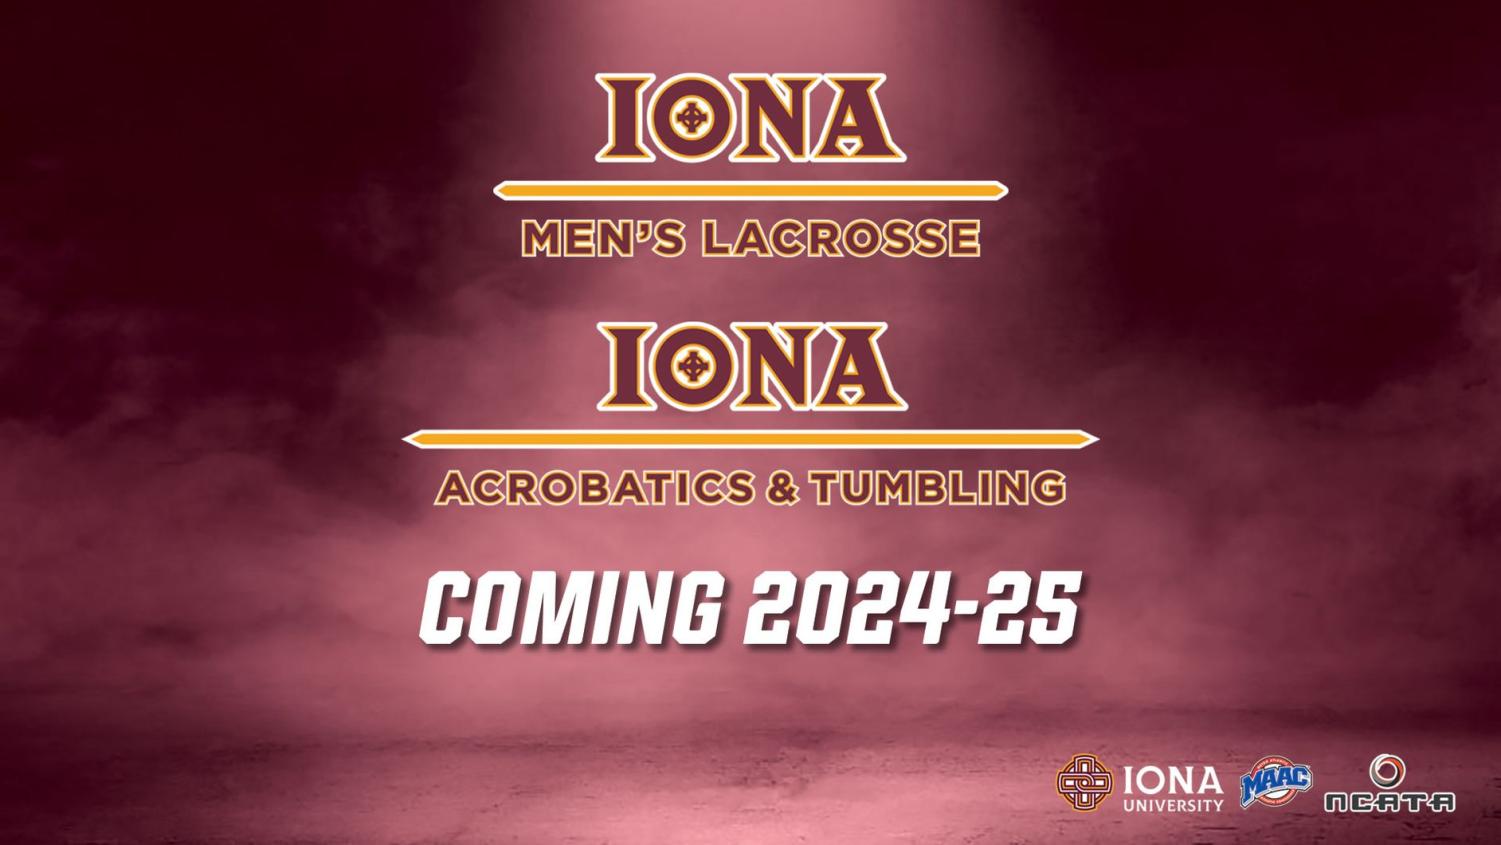 Iona to add two new sports – The Ionian